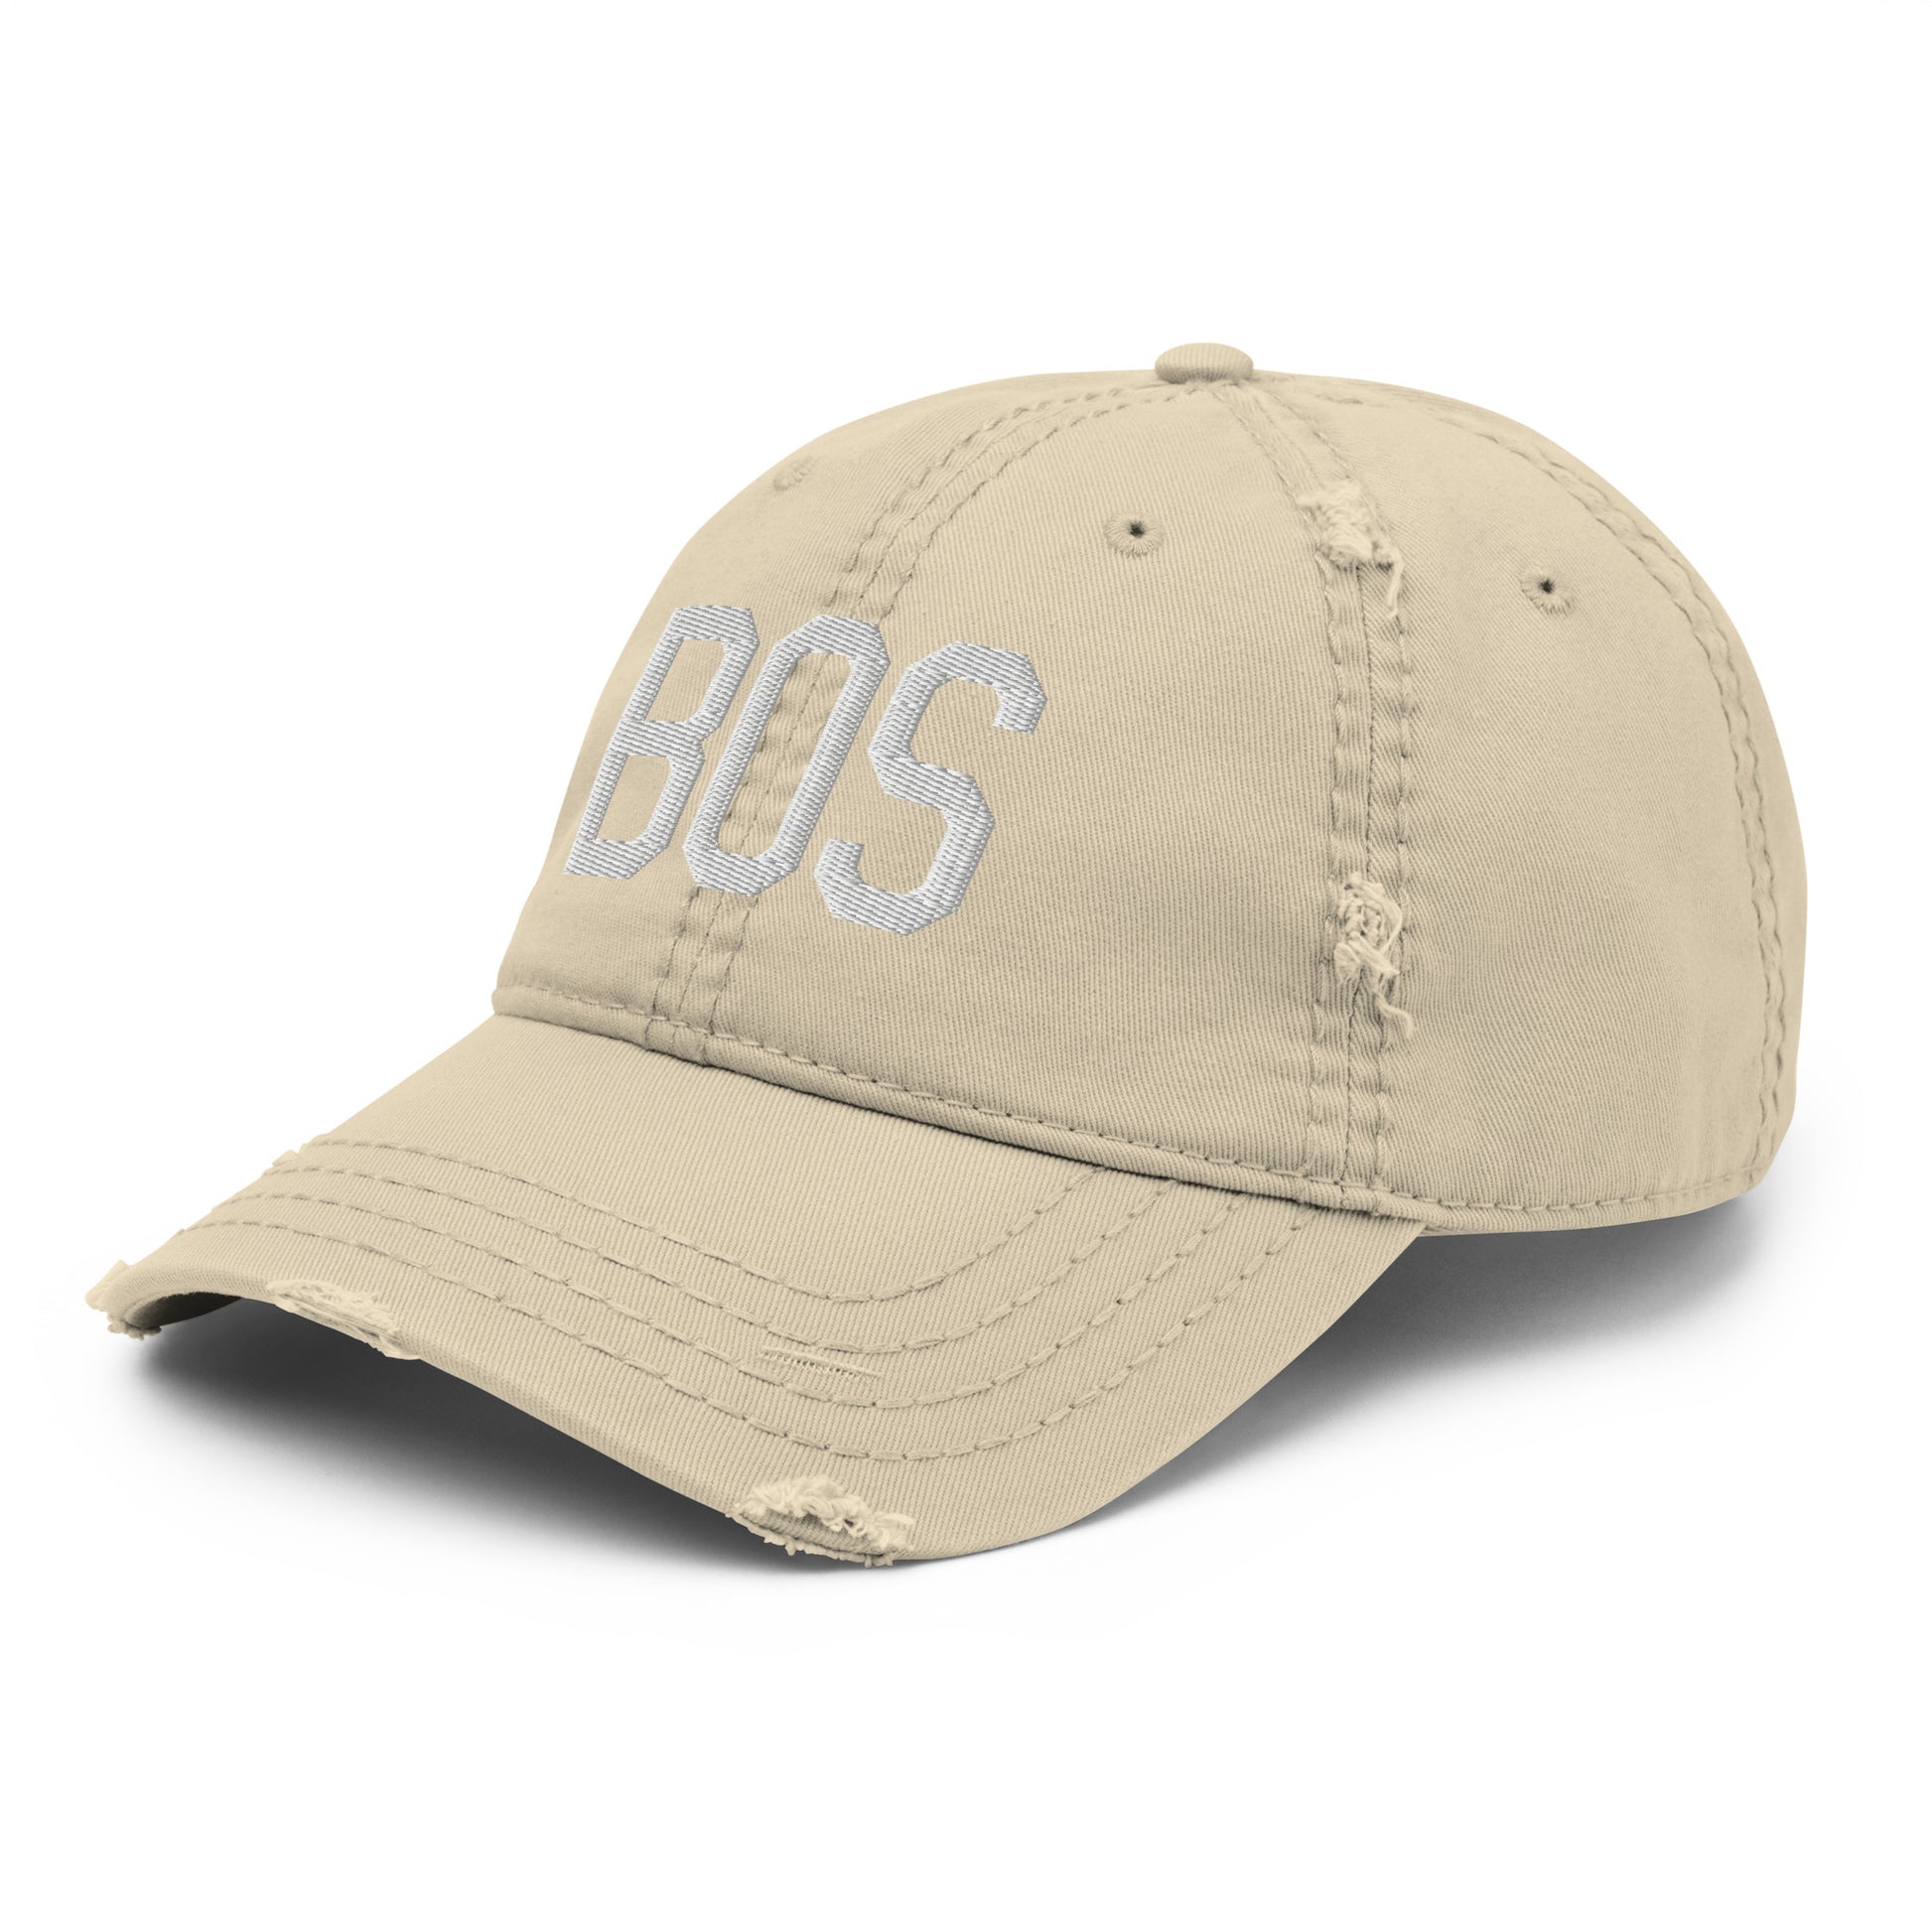 Airport Code Distressed Hat - White • BOS Boston • YHM Designs - Image 19